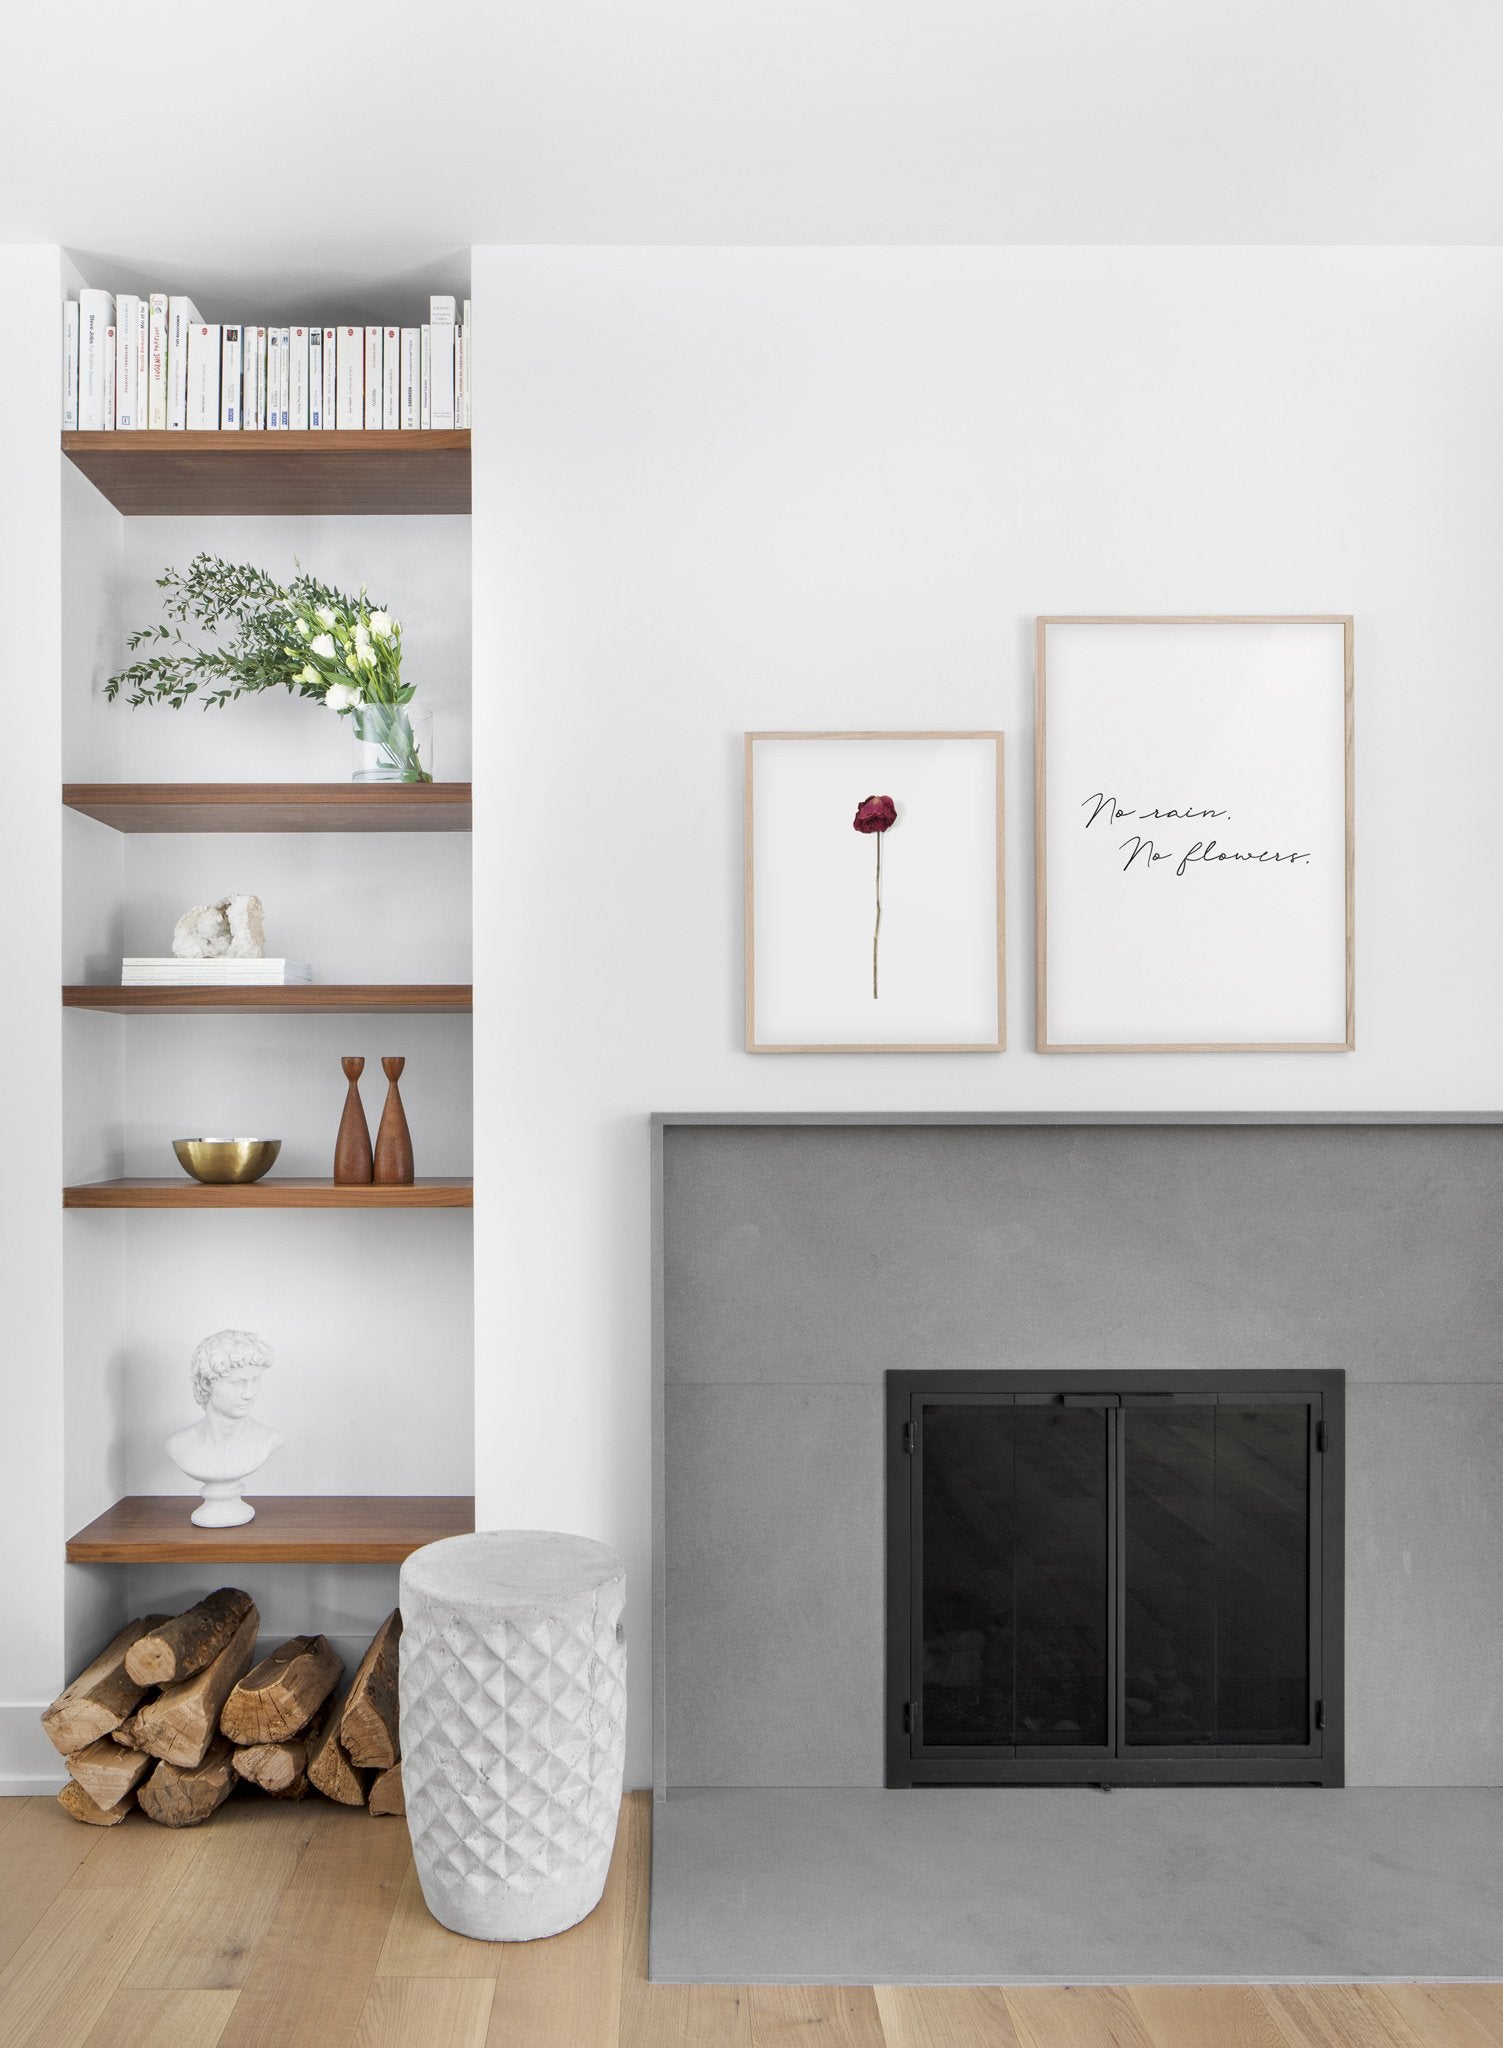 Weathered rose - botanical flower modern minimalist photography poster by Opposite Wall - Living room with fireplace